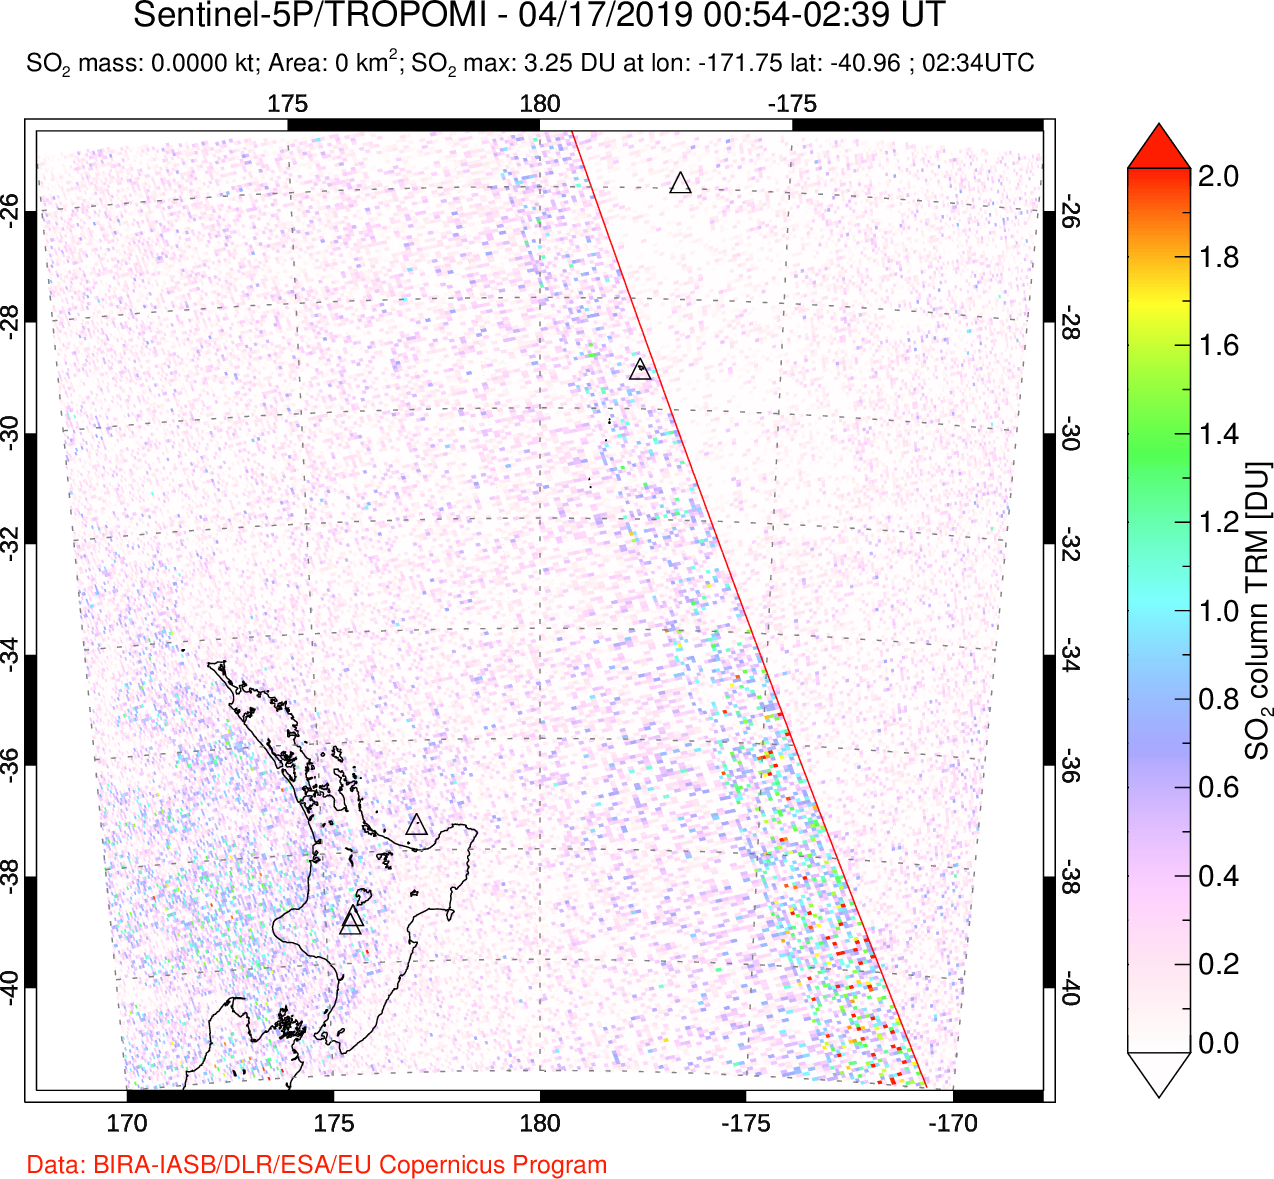 A sulfur dioxide image over New Zealand on Apr 17, 2019.